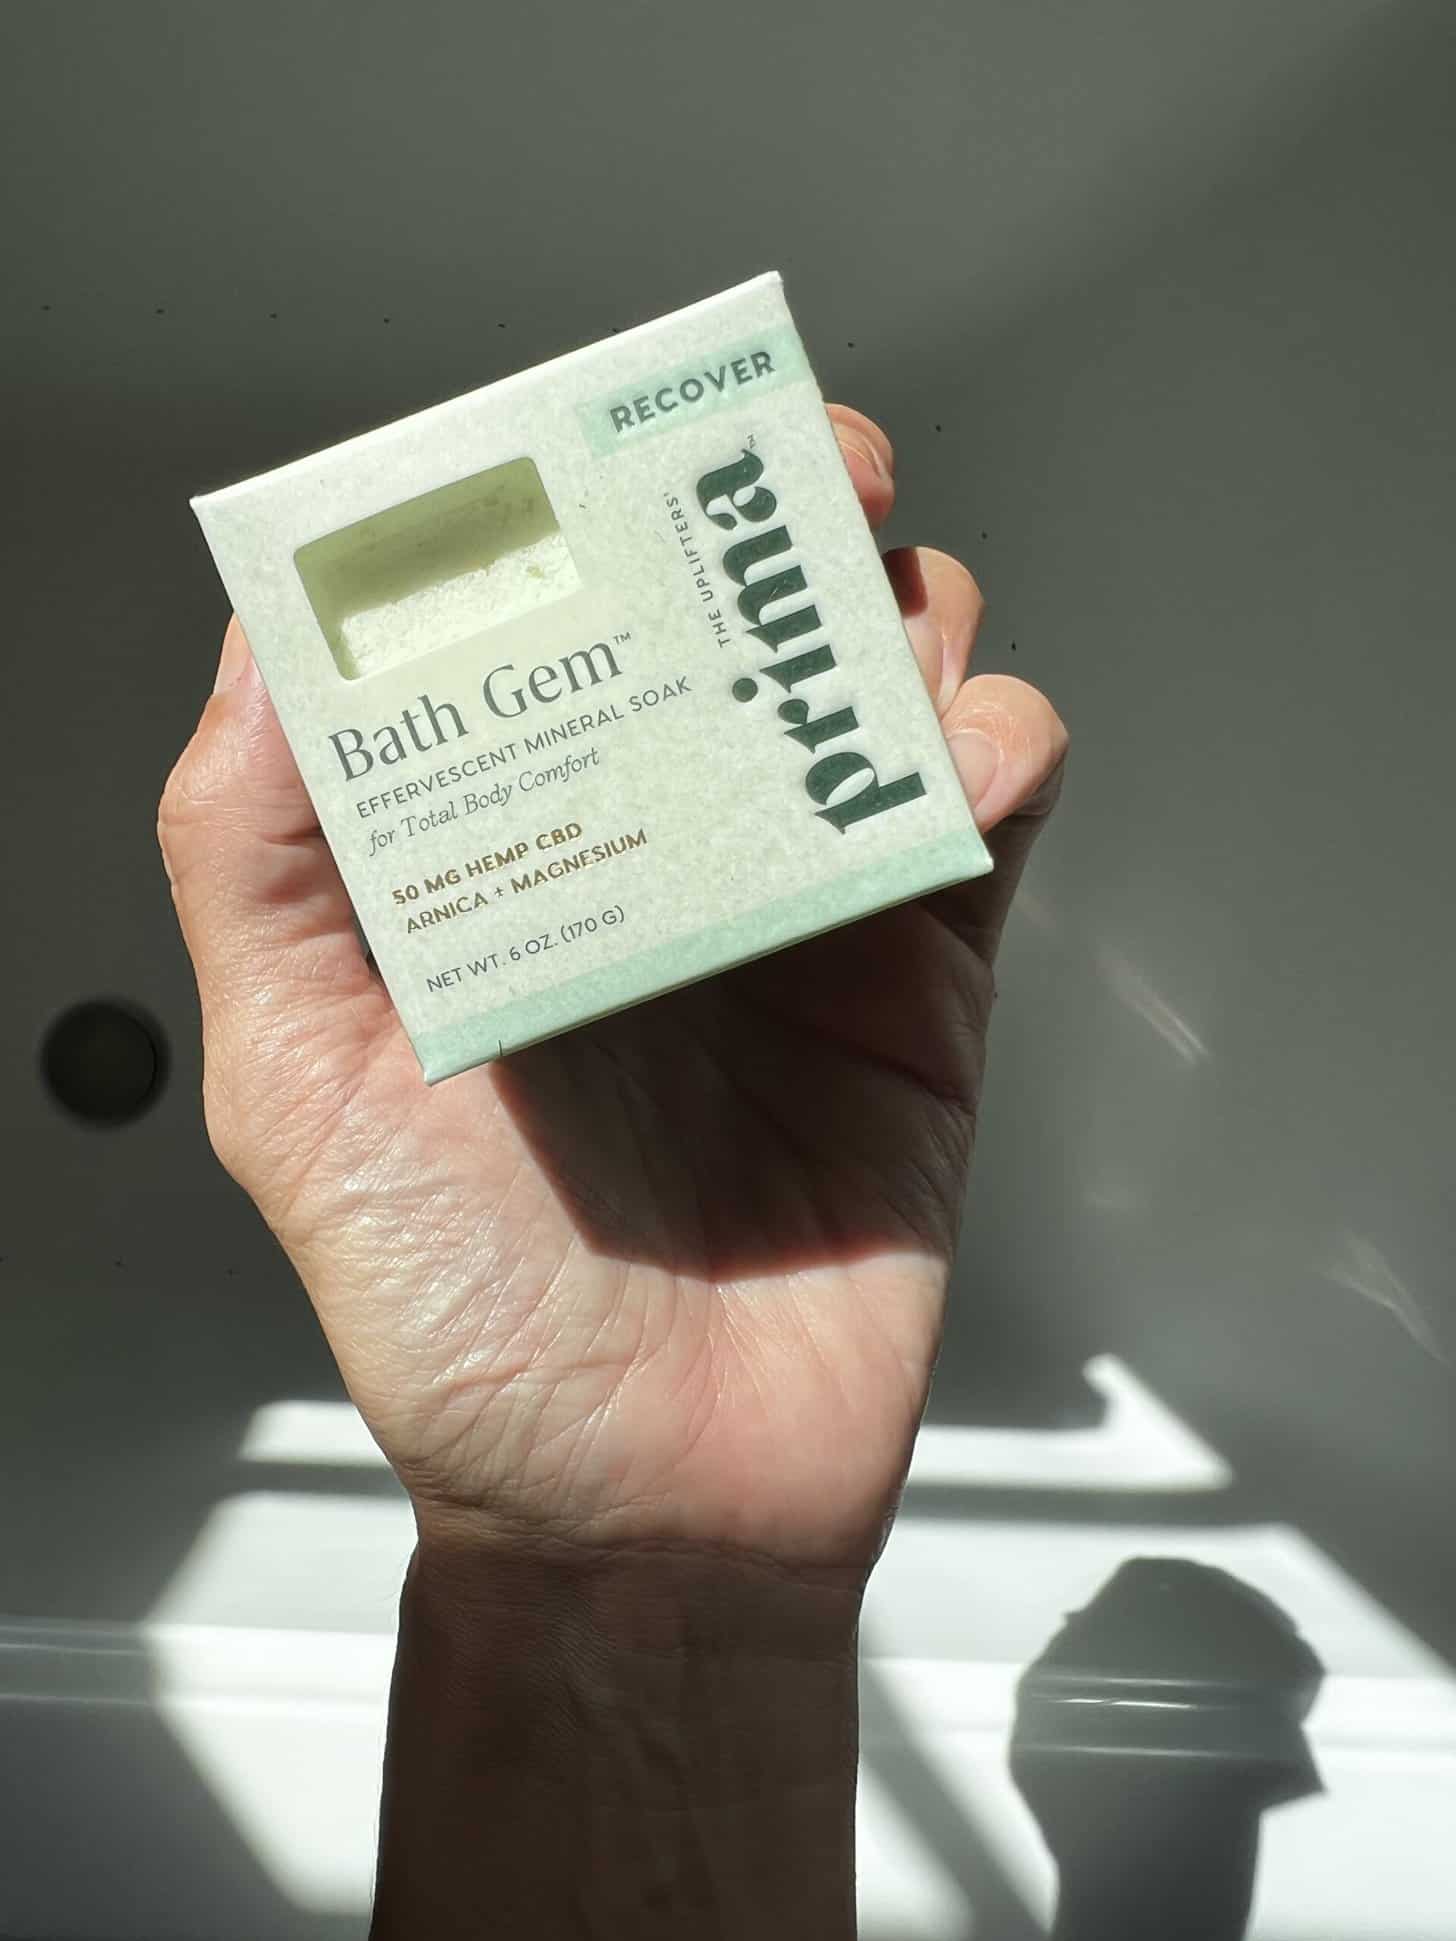 a hand holding up a box of Prima's Bath Gem Recover